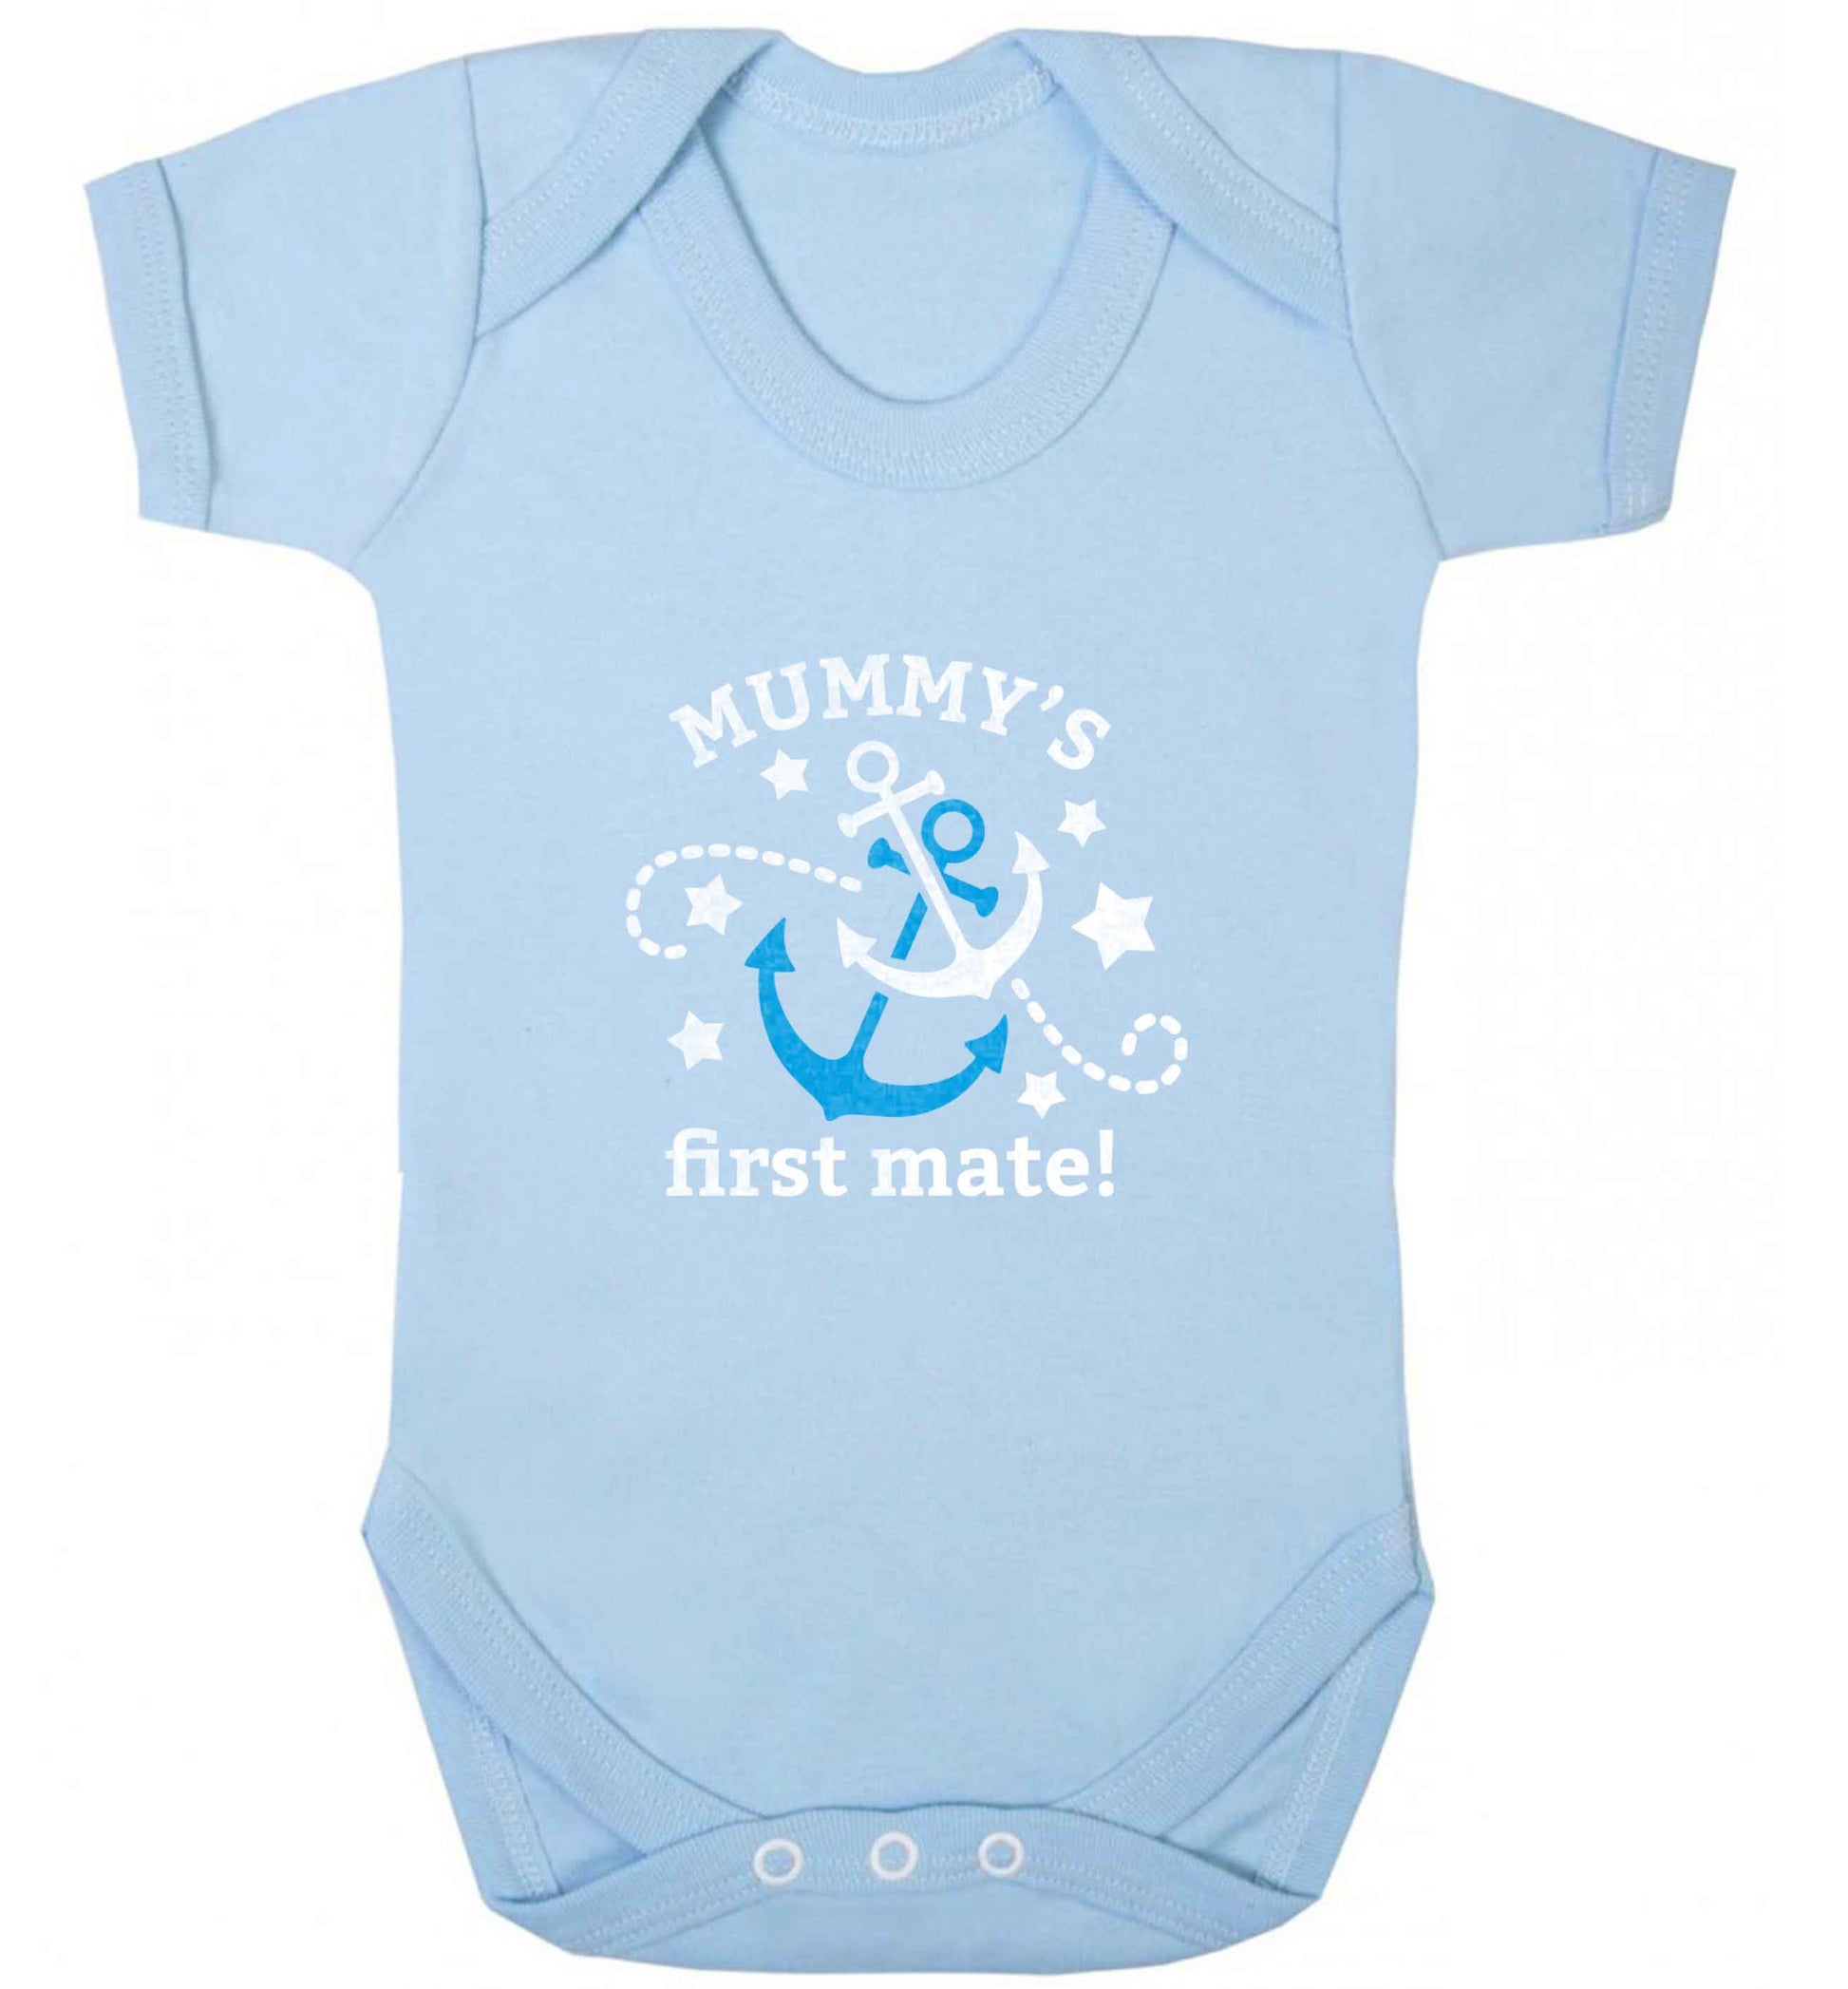 Mummy's First Mate baby vest pale blue 18-24 months